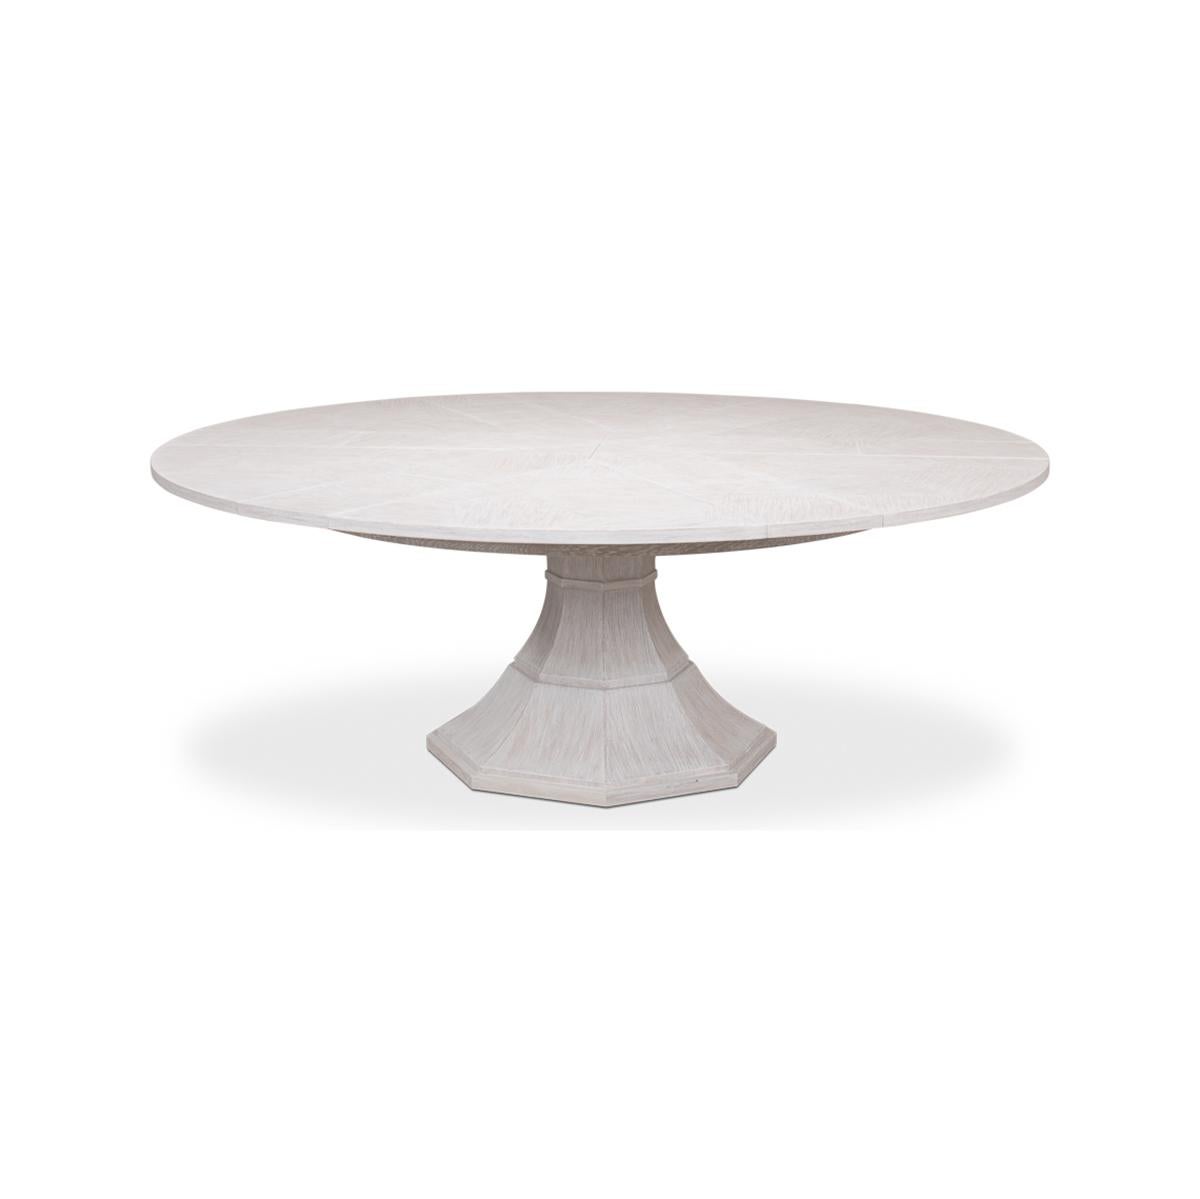 Contemporary Modern Round Dining Table - Whitewash Oak For Sale